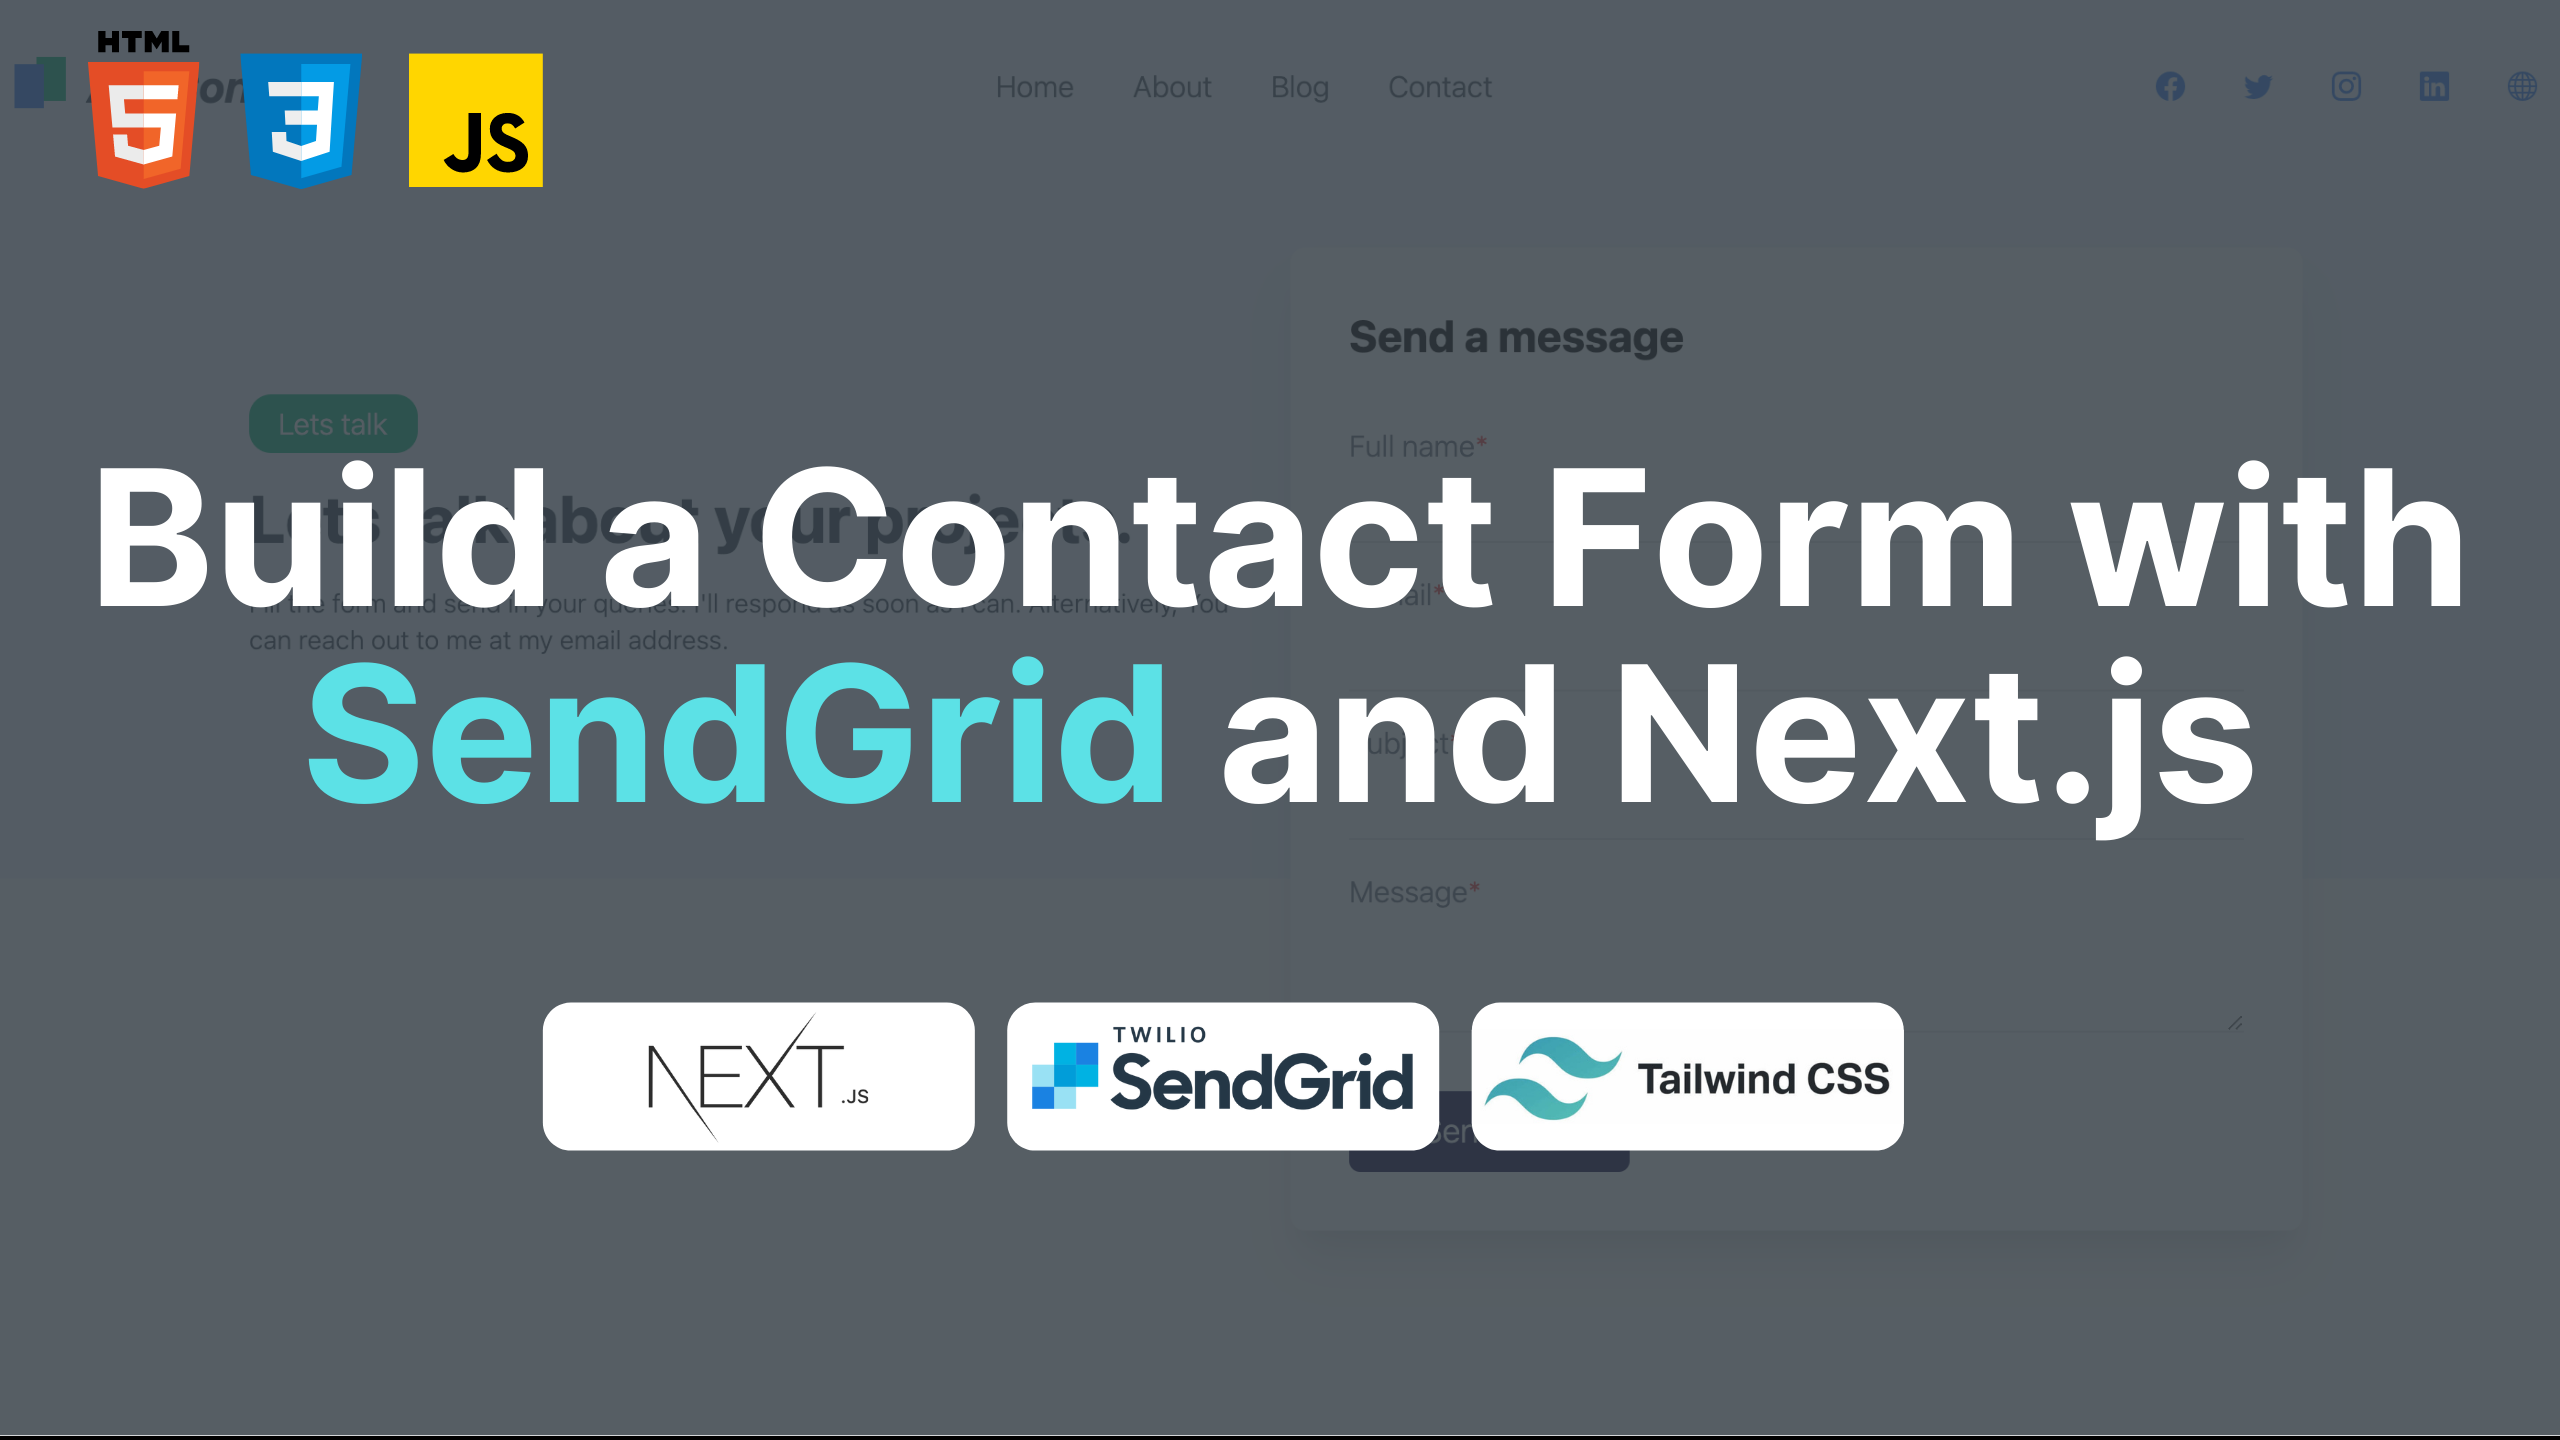 How to Build a Contact Form with SendGrid and Next.js